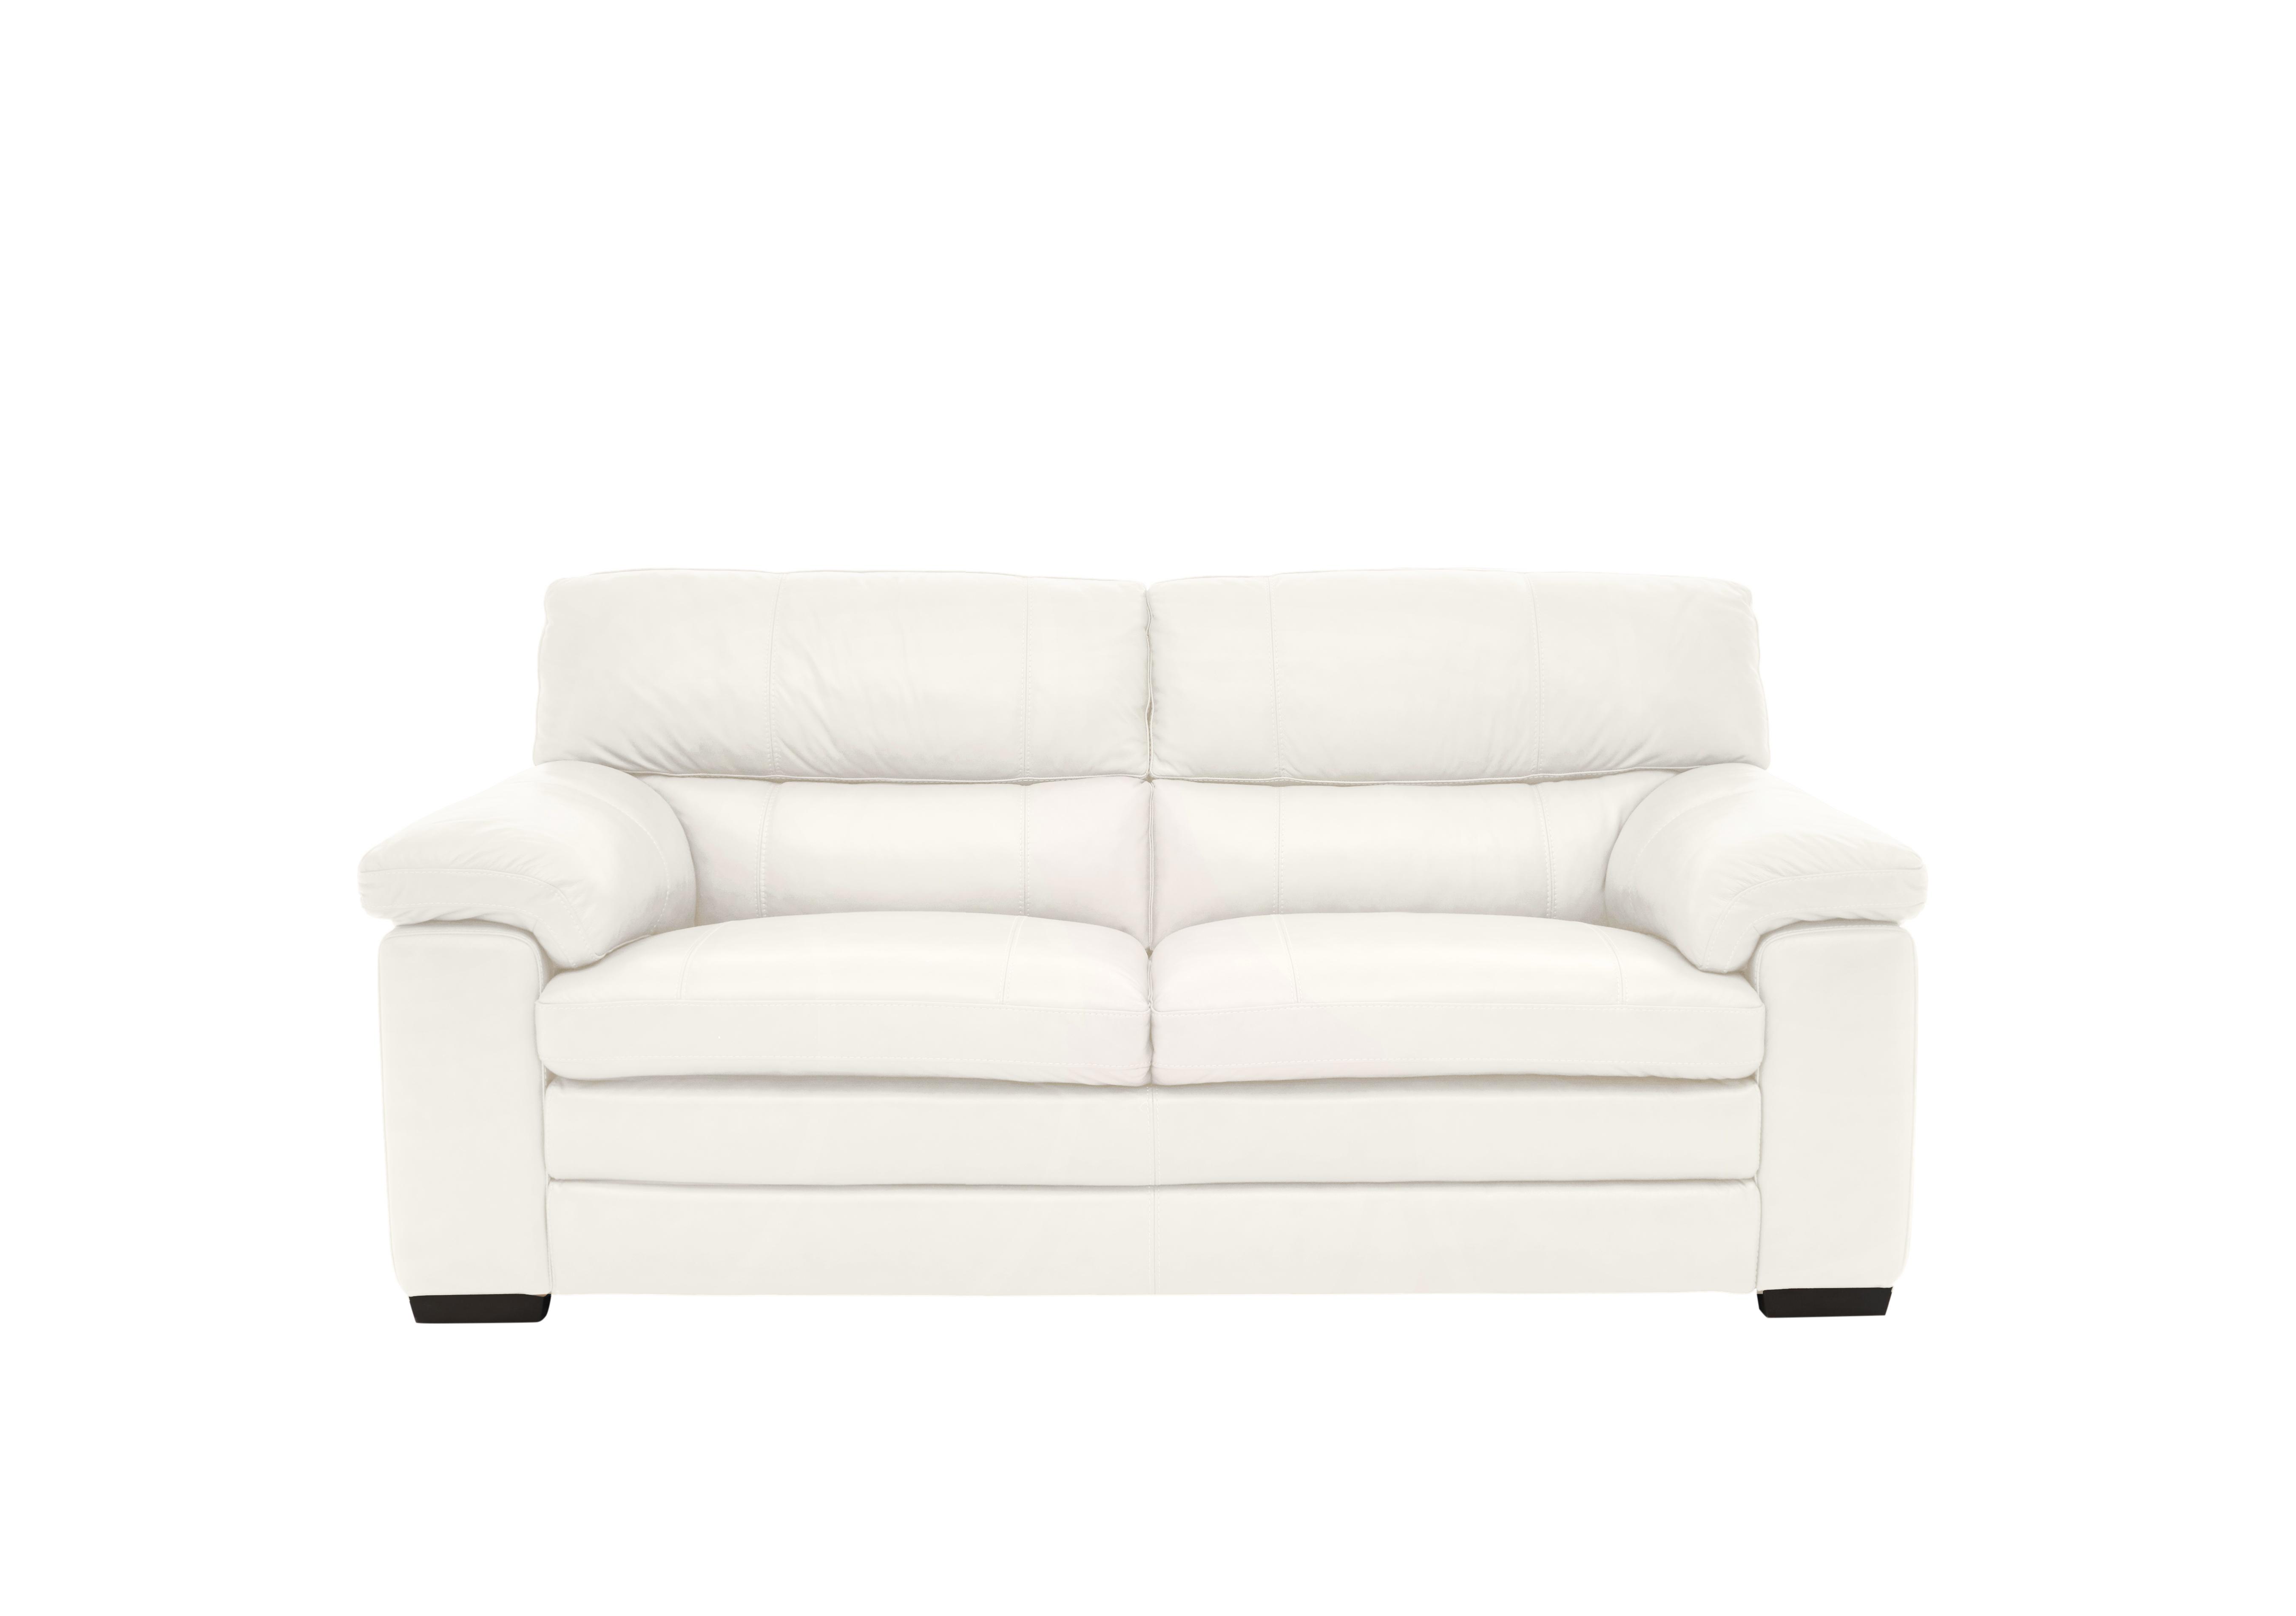 Cozee 2 Seater Pure Premium Leather Sofa in Bv-744d Star White on Furniture Village